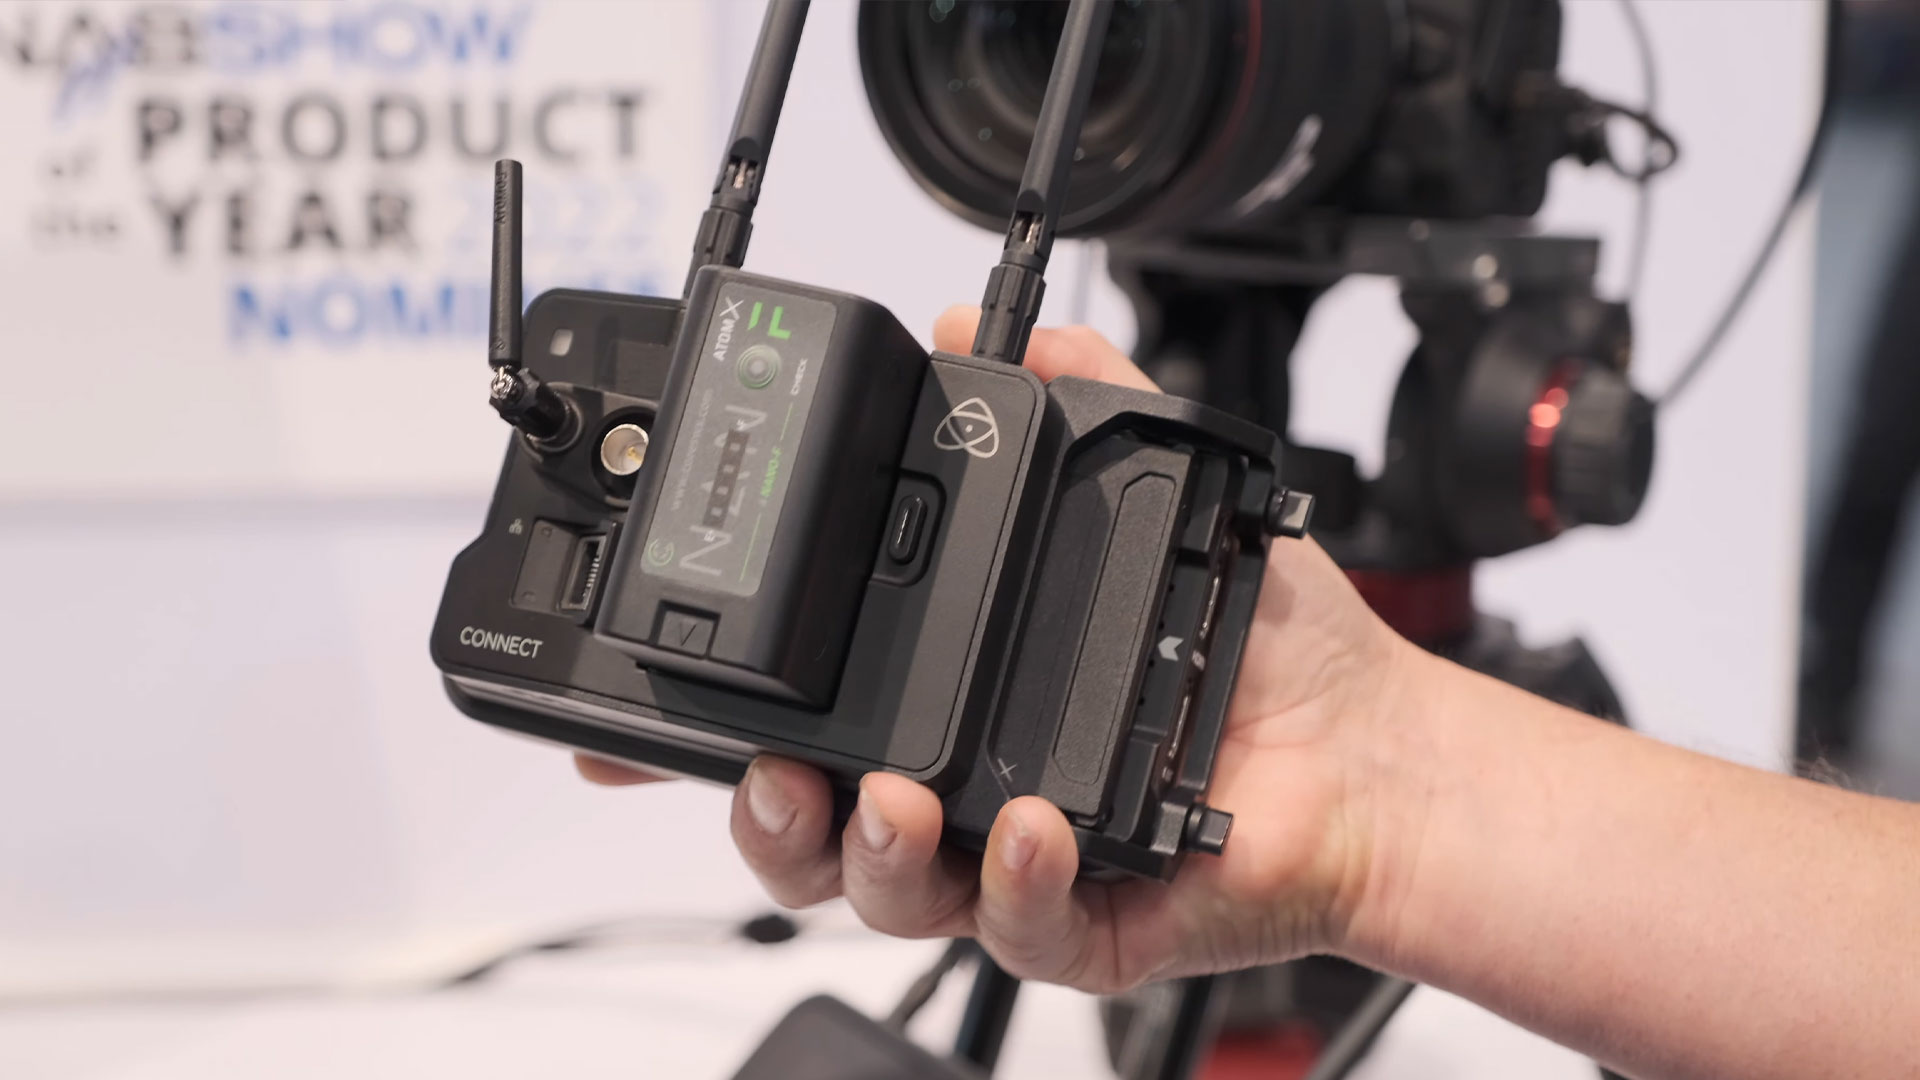 Atomos CONNECT and Shogun CONNECT 7 Introduced | CineD